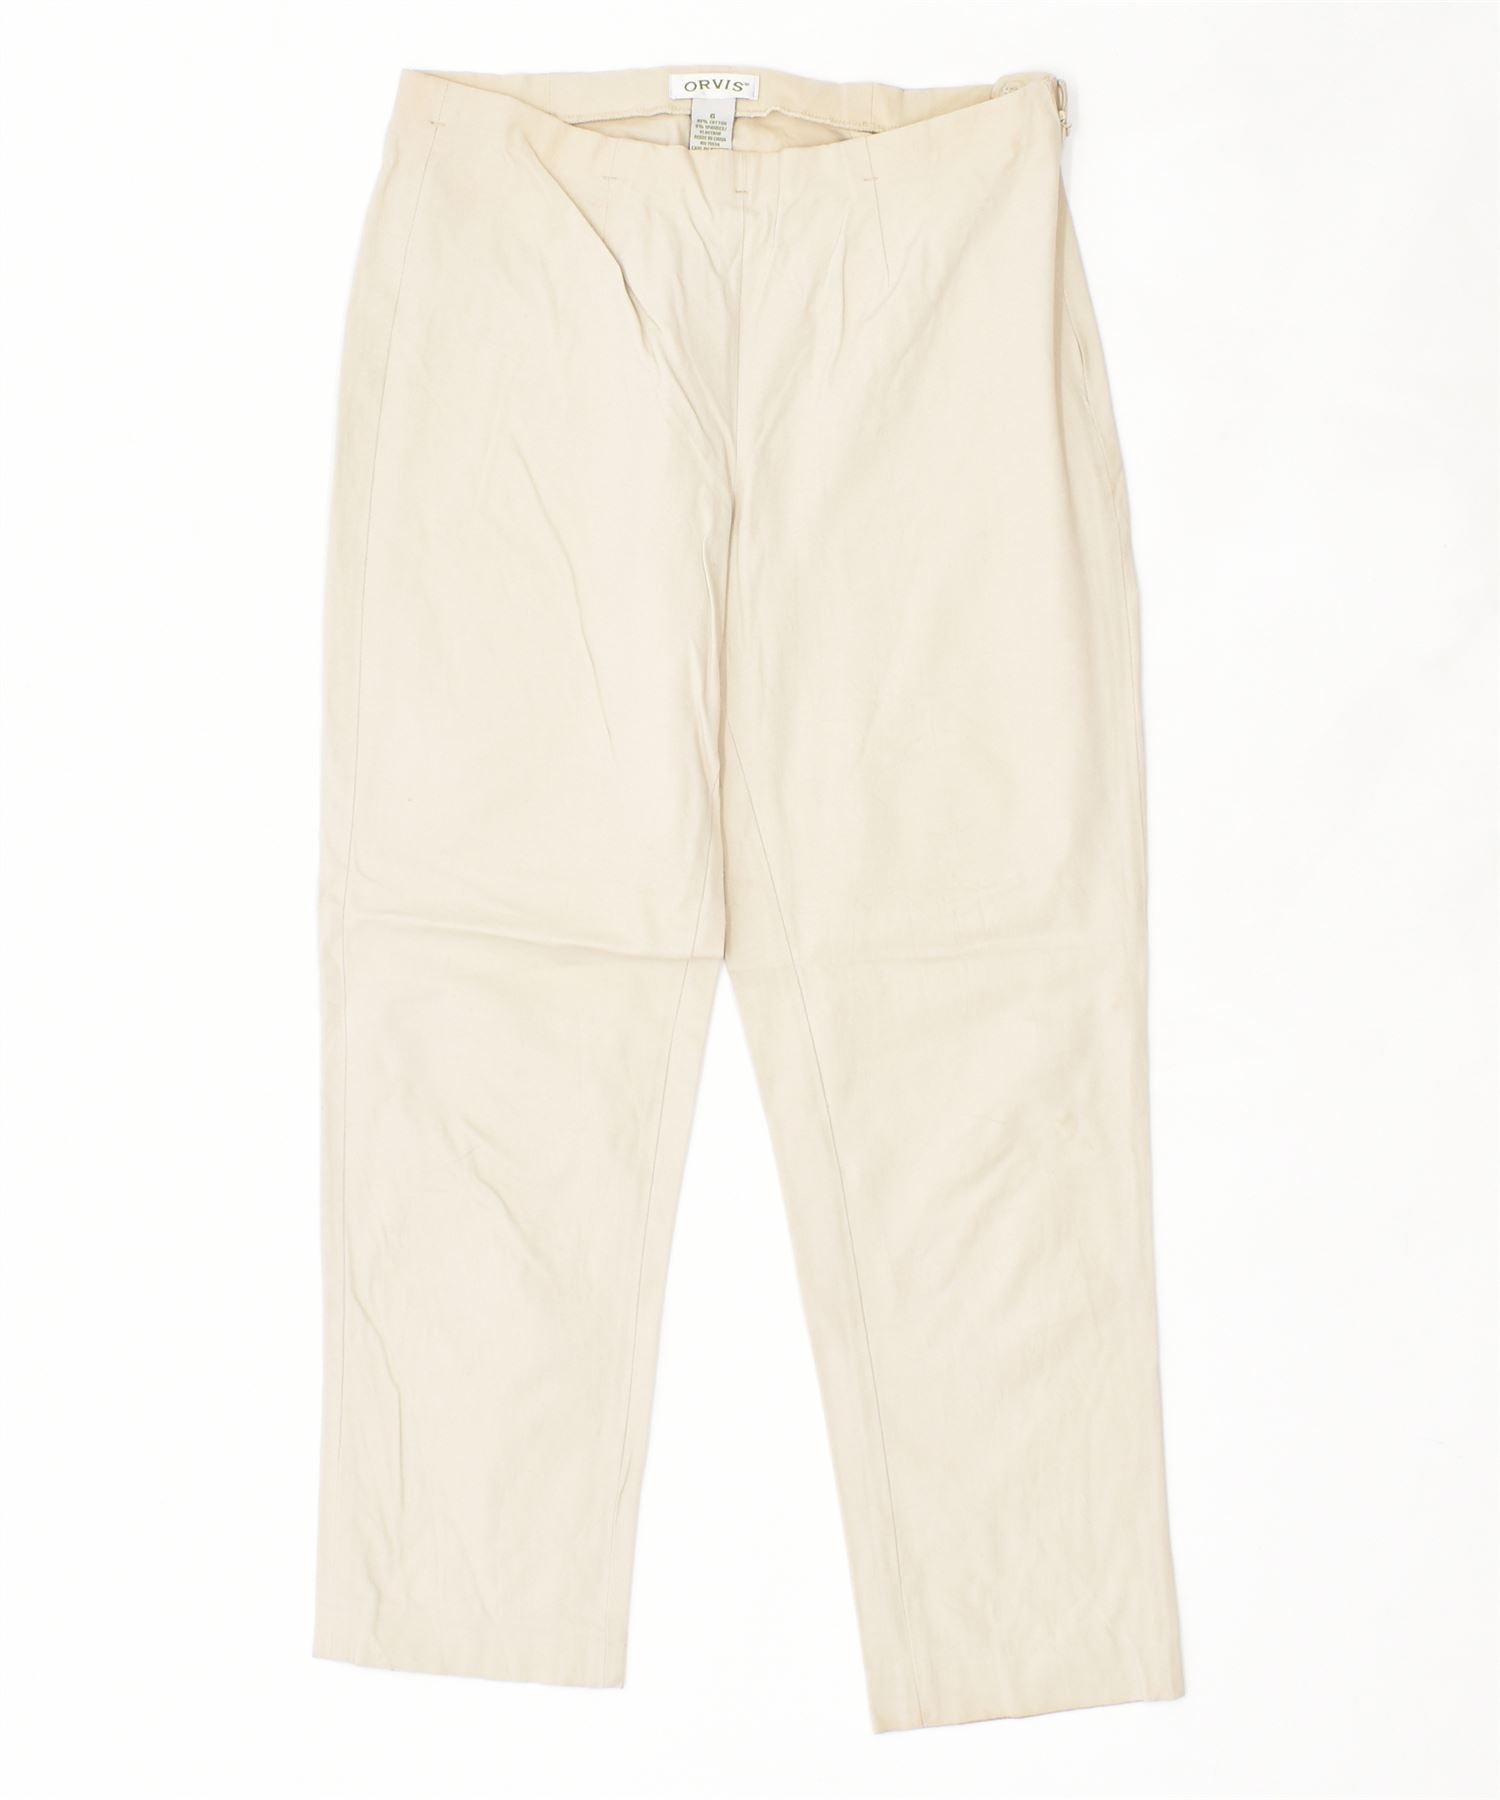 ORVIS Womens Tapered Casual Trousers US 6 Medium W32 L27 Beige